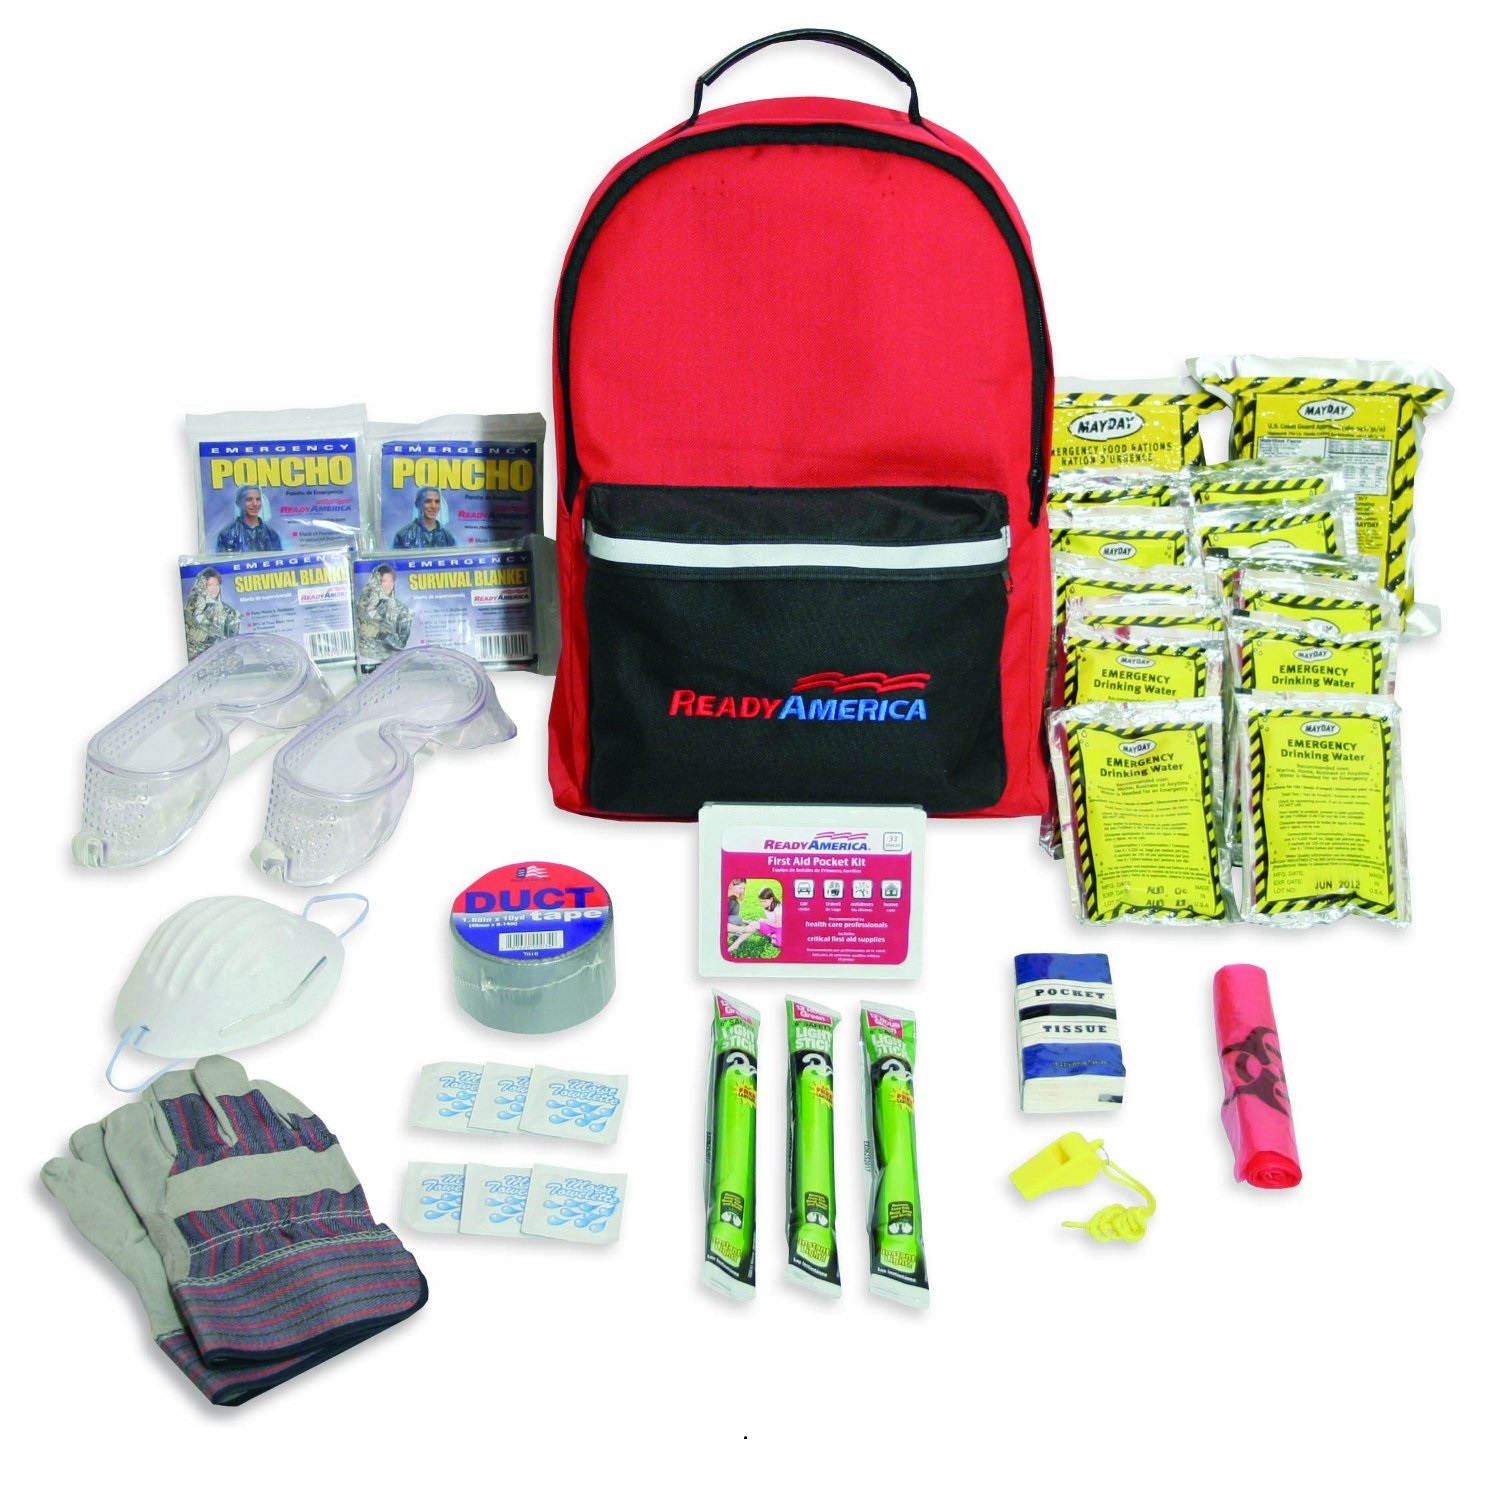 Ready America 2 Person Tornado Survival Kit-3 Day Pack - 70287